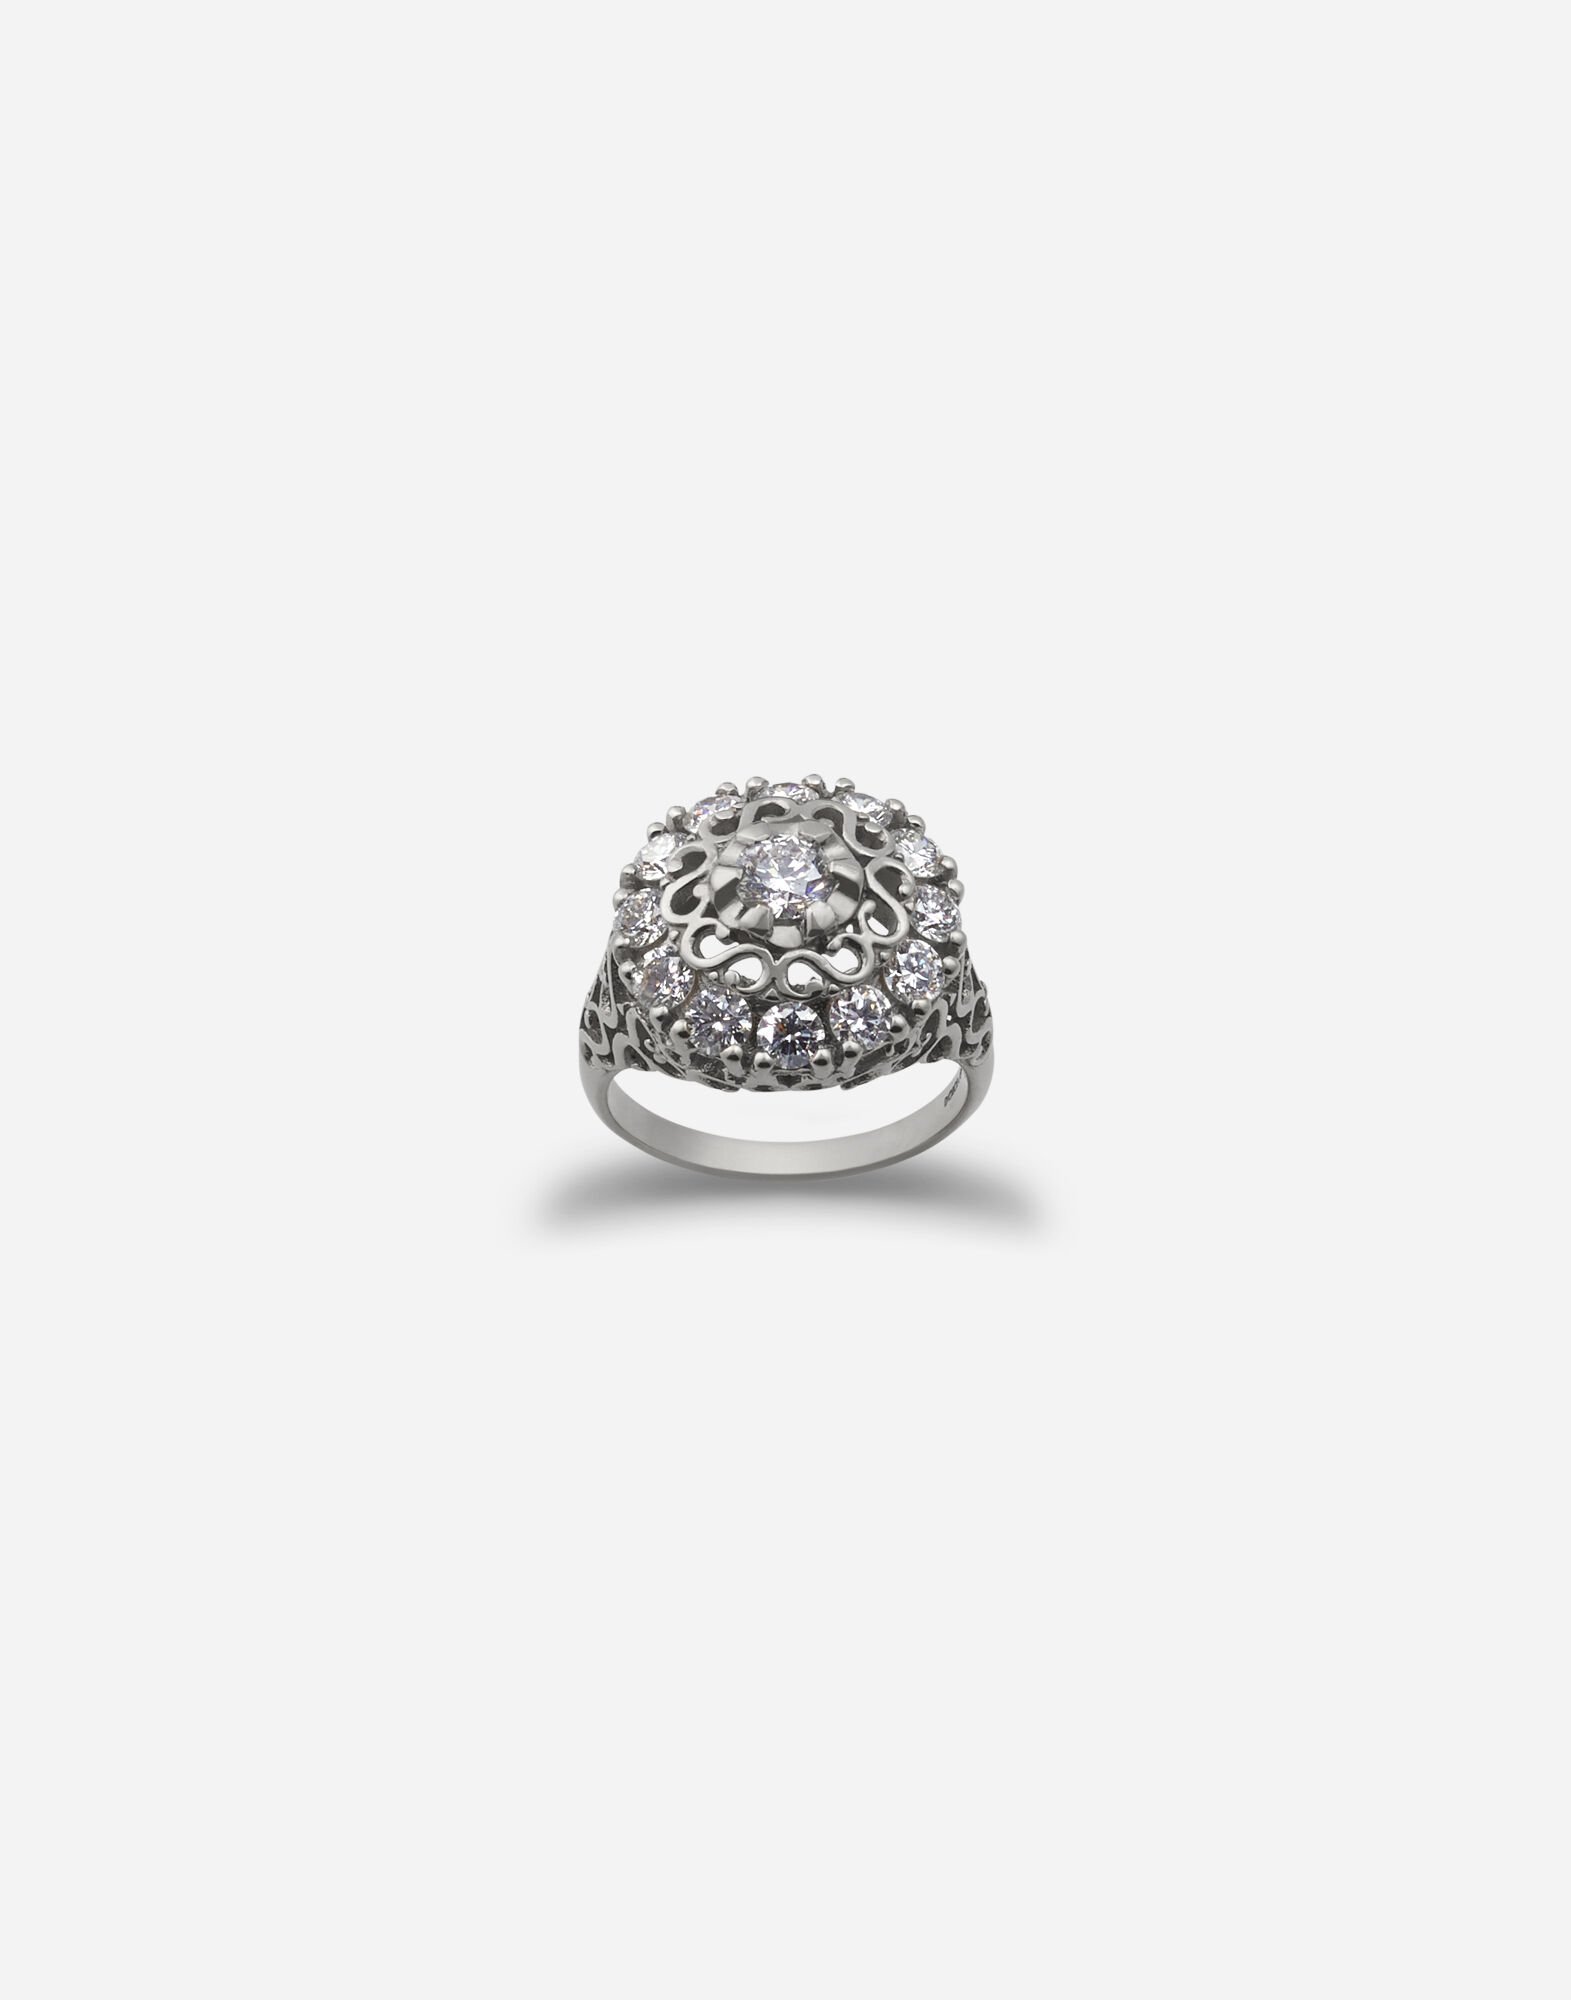 Dolce & Gabbana Sicily ring in white gold with diamonds Gold WRMR1GWMIXS